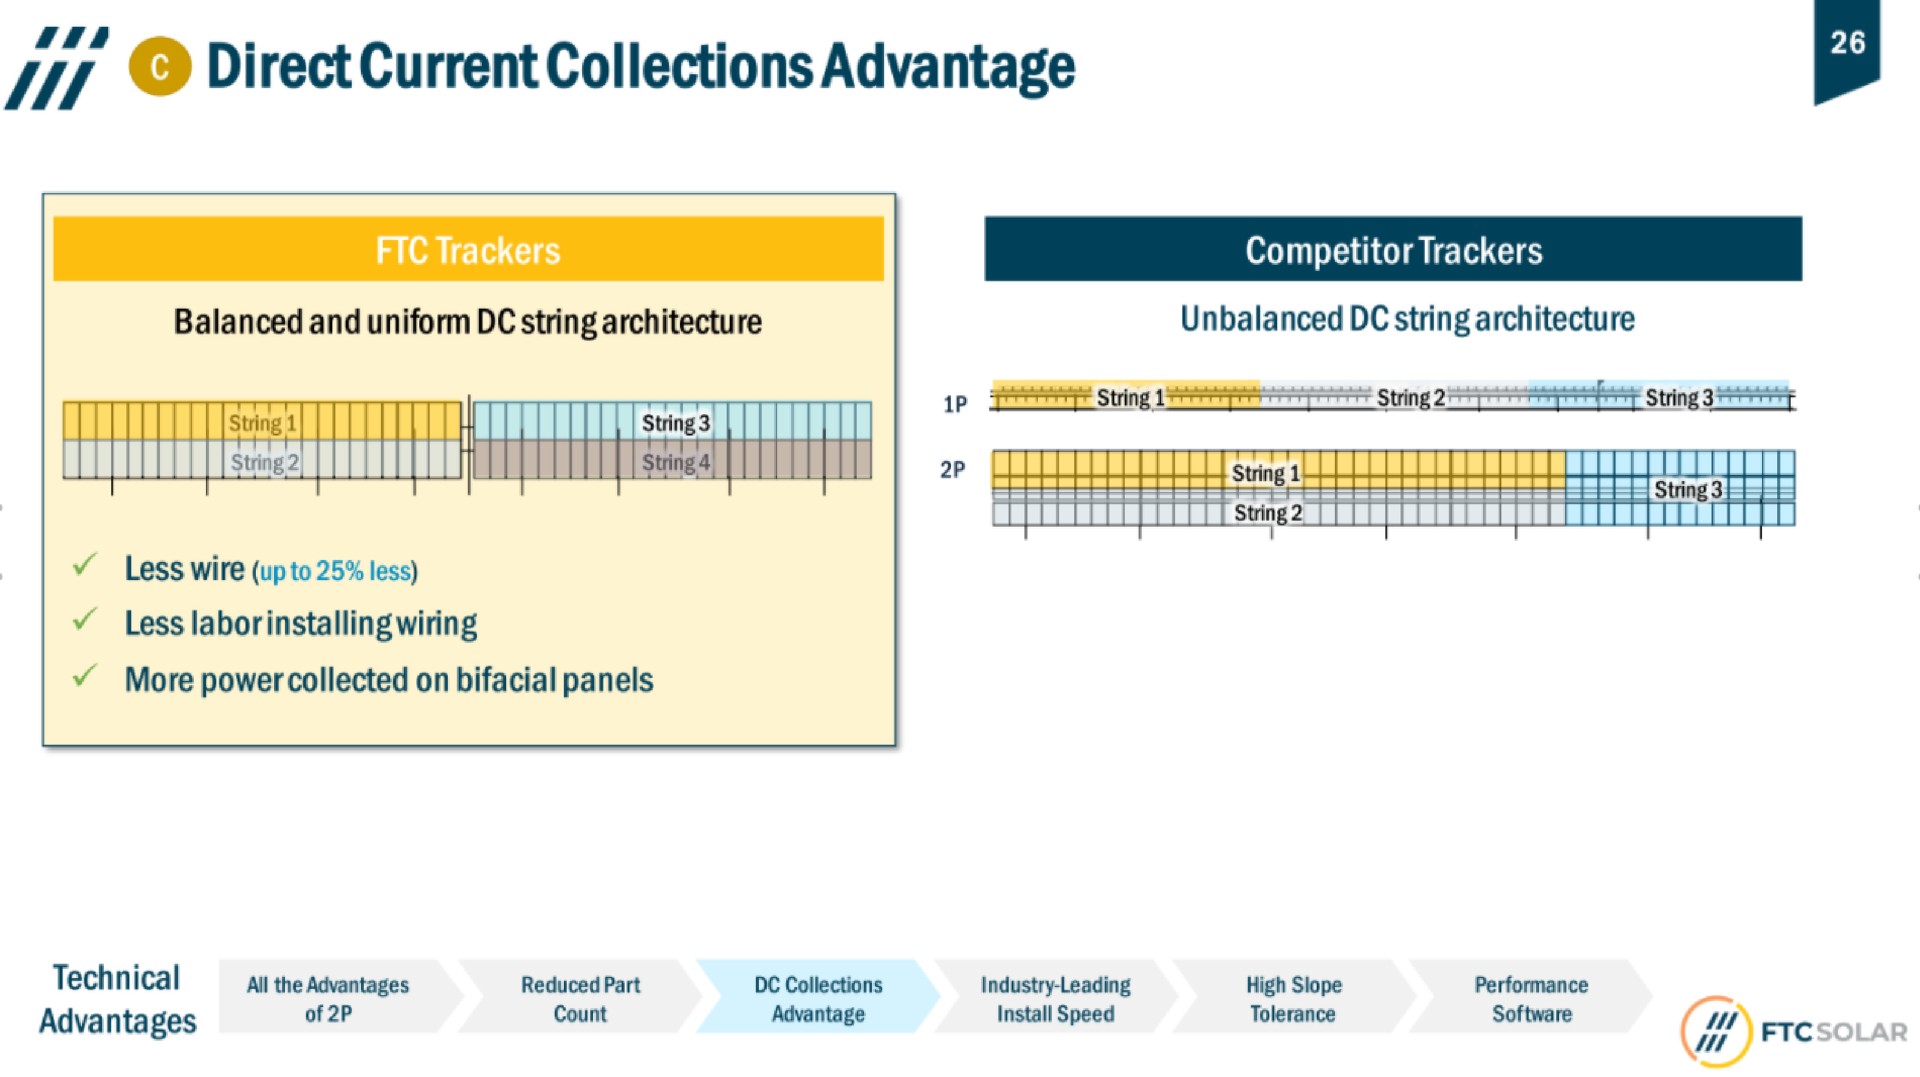 direct current collections advantage | FTC Solar